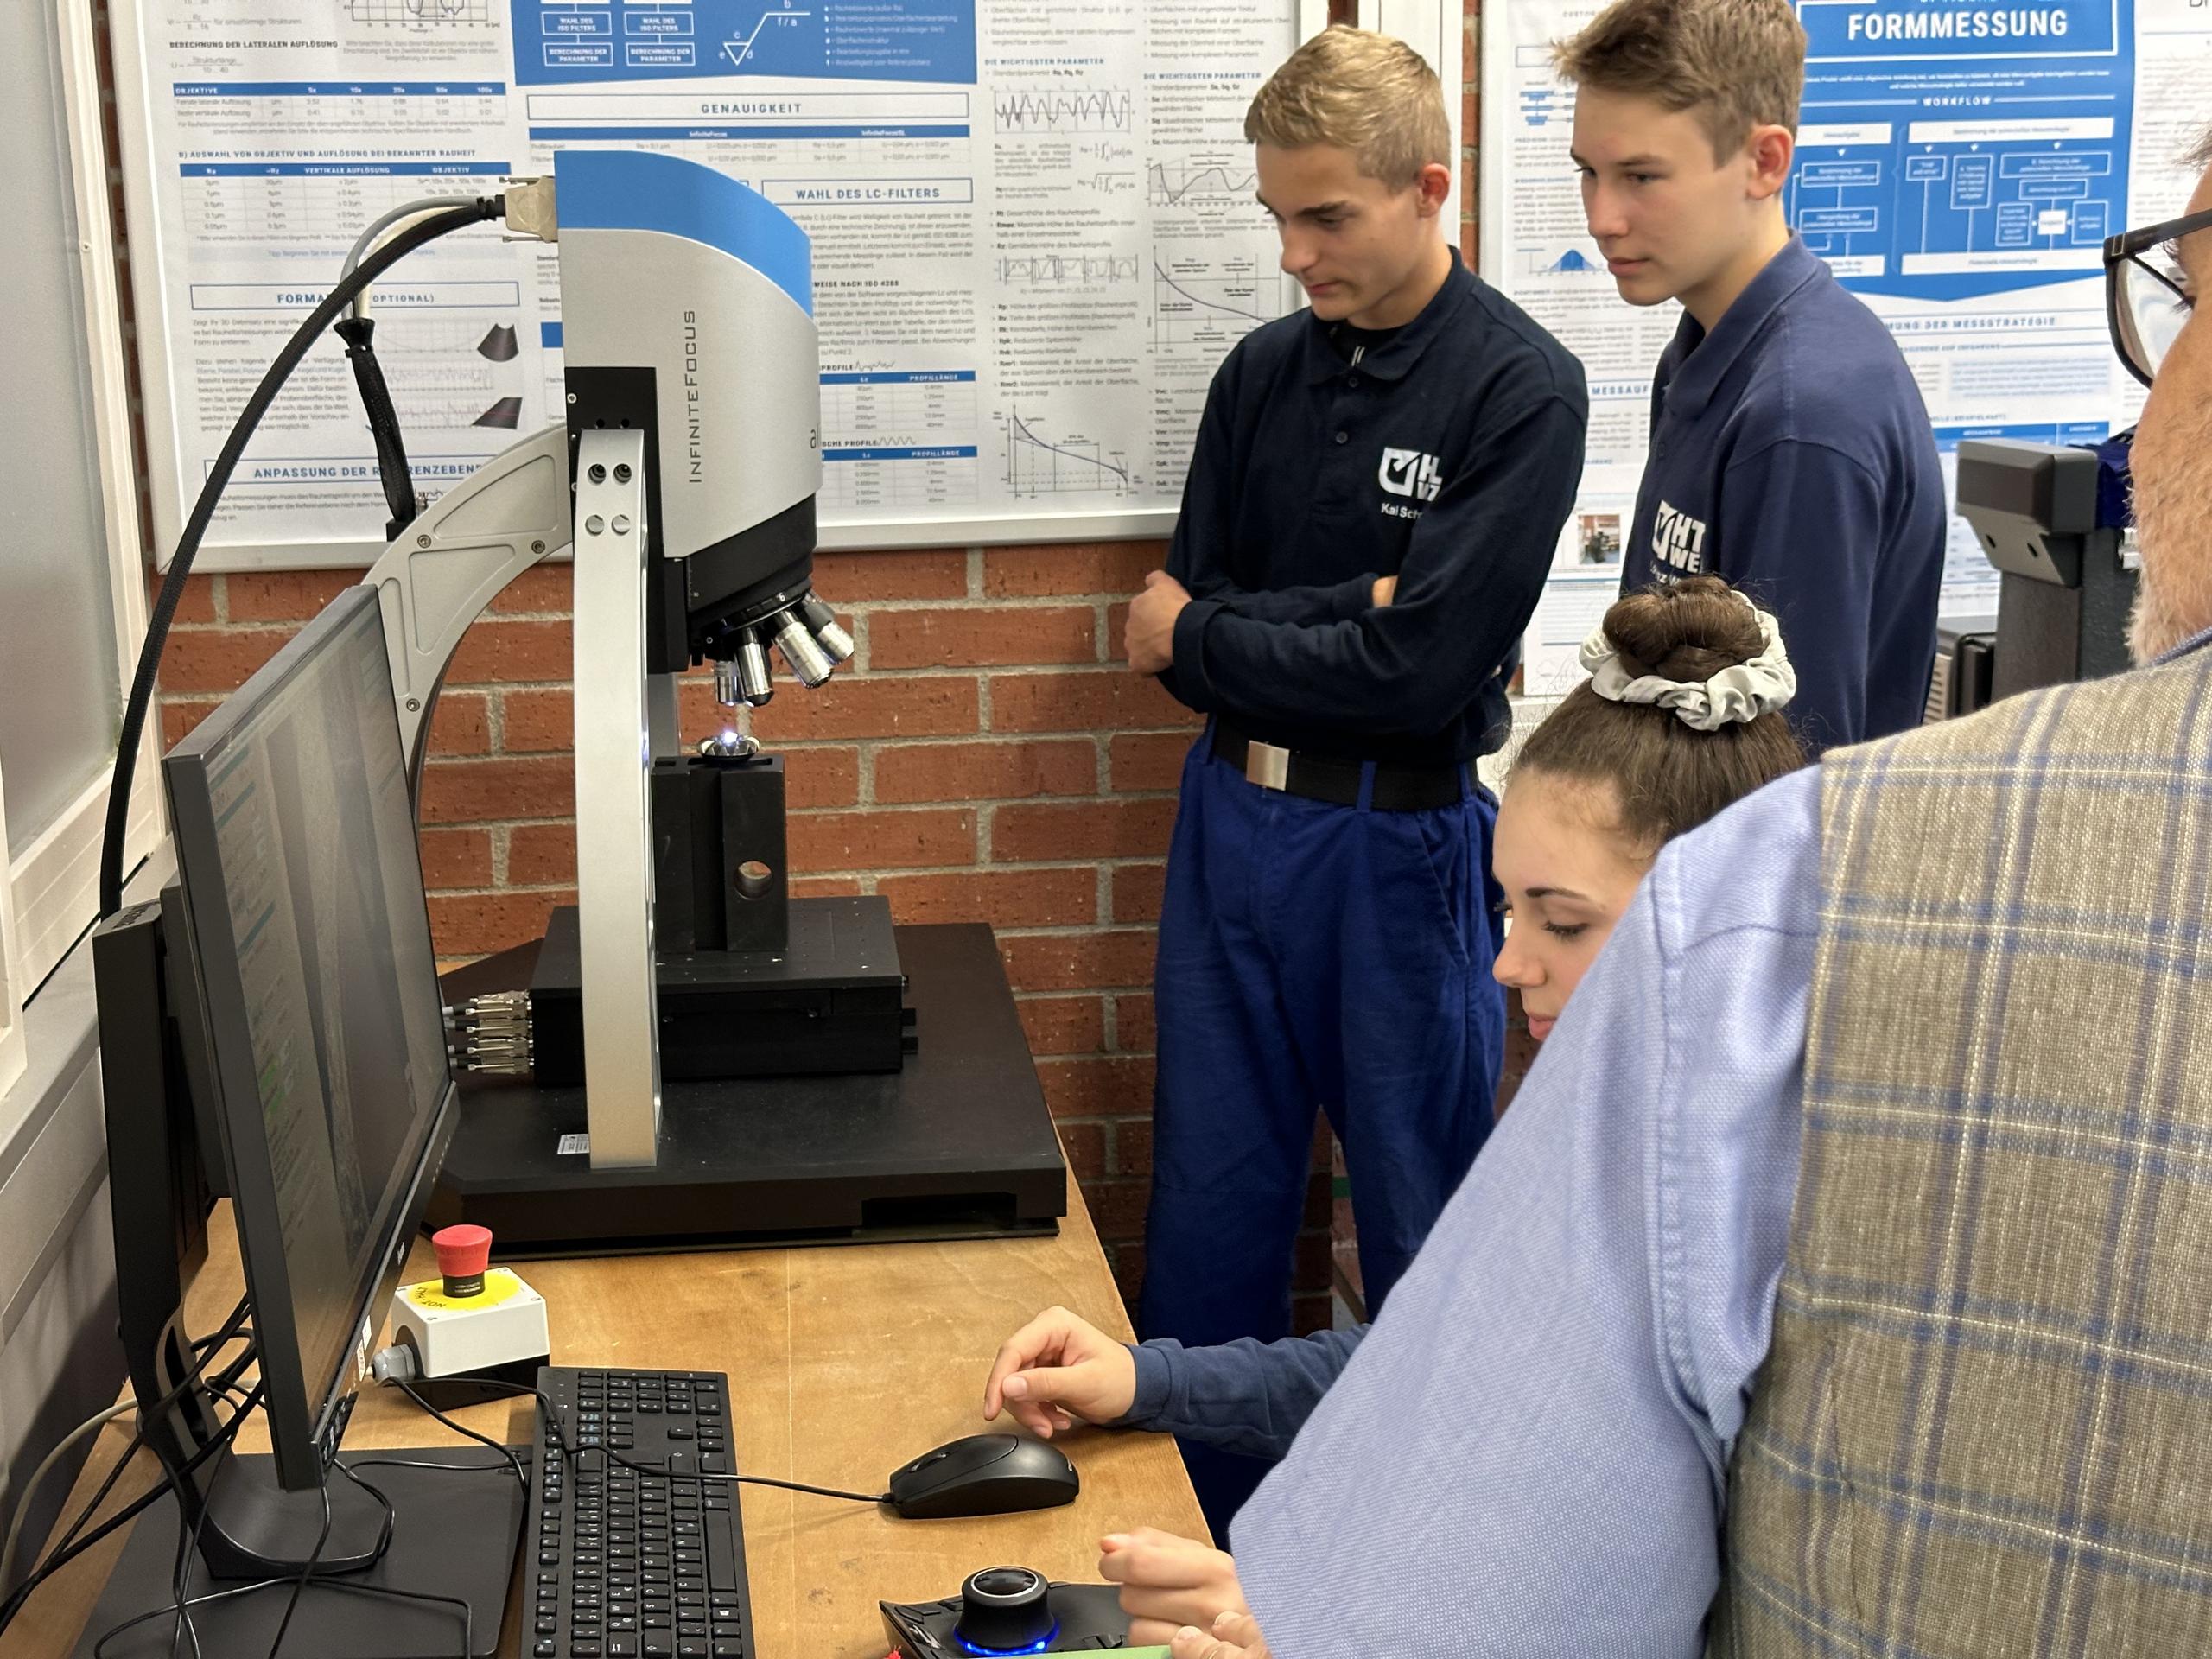 Bruker Aliconas investment in education: optical 3D meassuring device in technical school